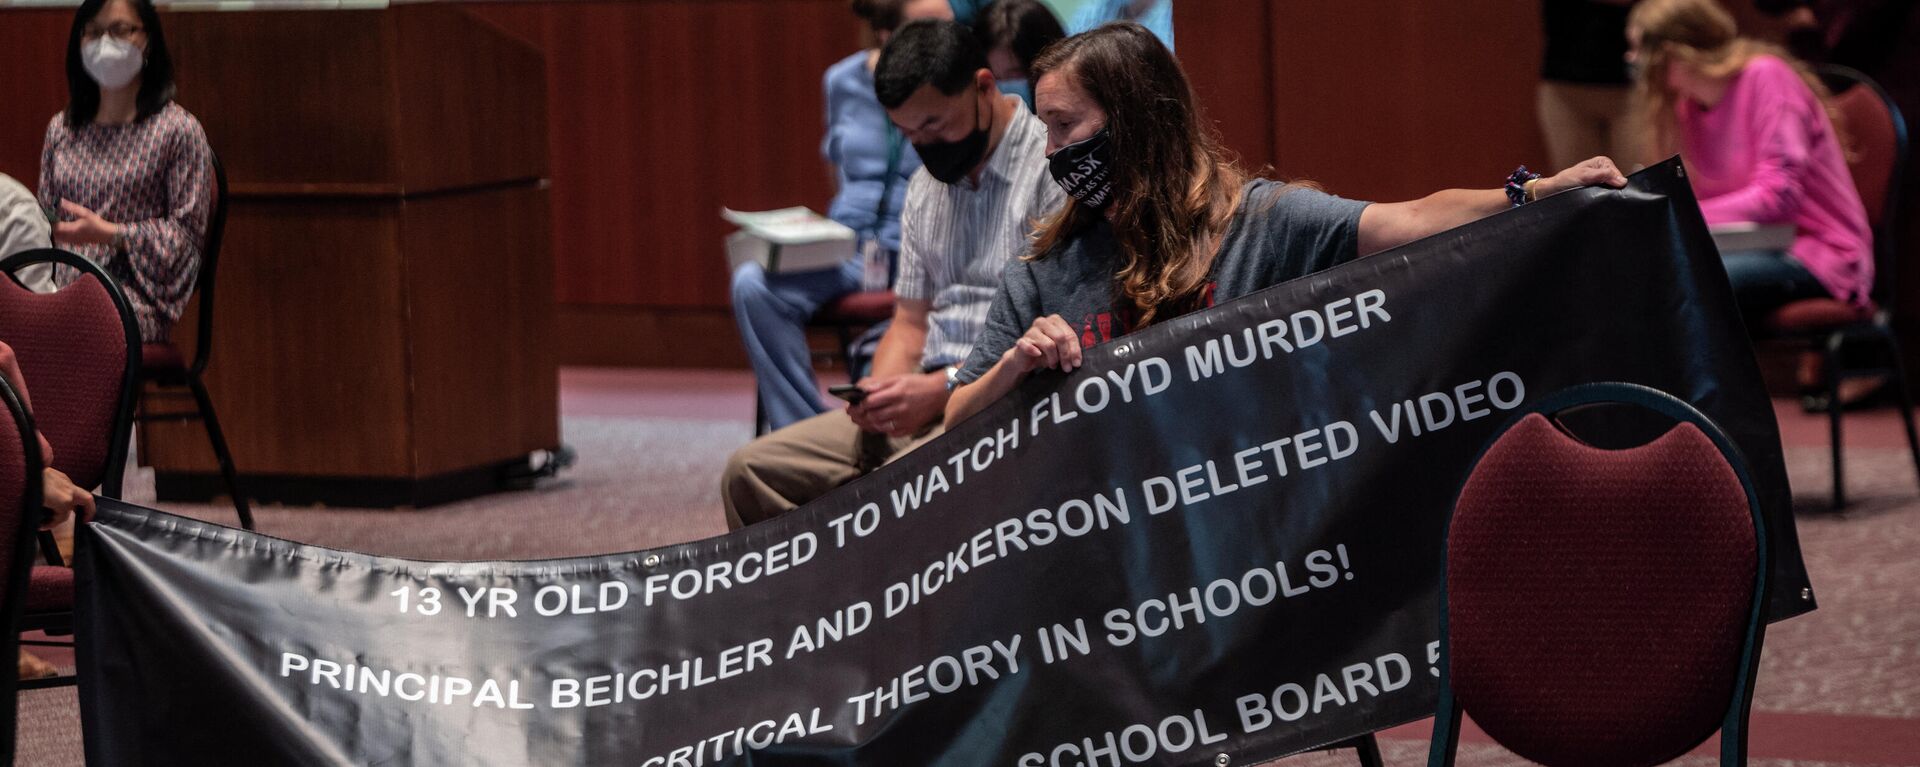 A woman holds up her sign against Critical Race Theory (CRT) being taught during a Loudoun County Public Schools (LCPS) board meeting in Ashburn, Virginia on October 12, 2021 - Sputnik International, 1920, 13.03.2022